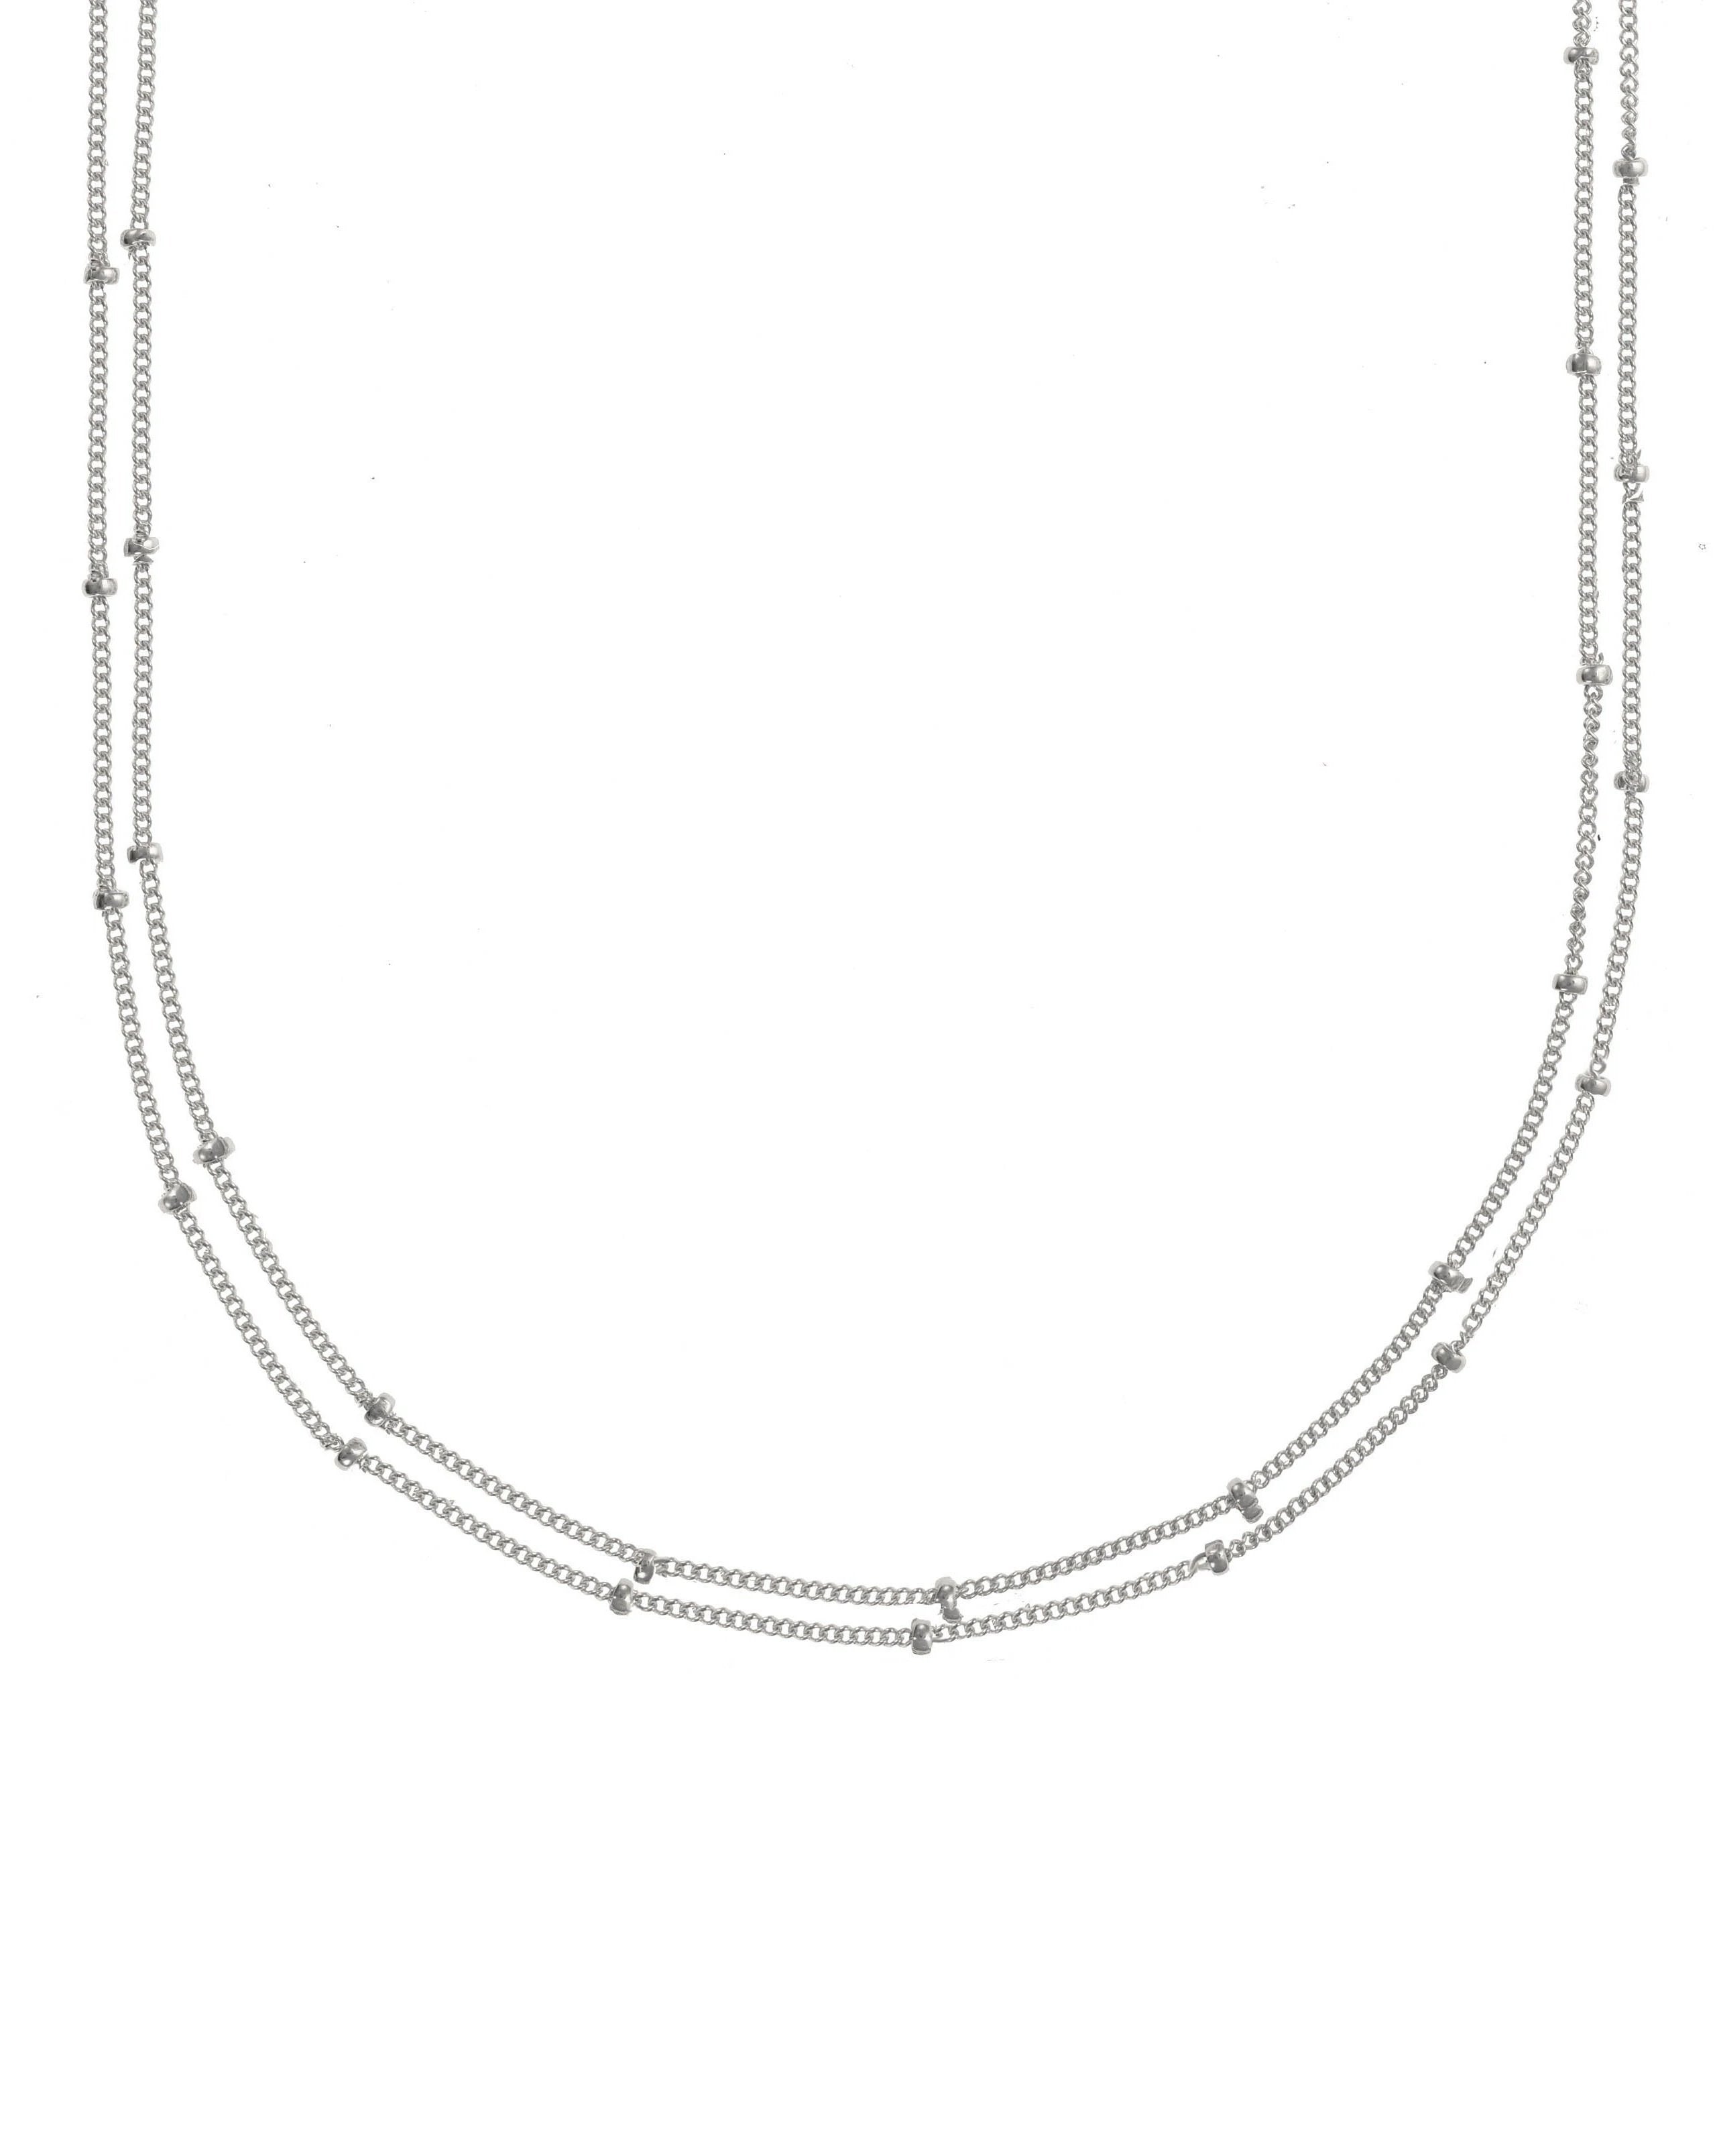 Galas Choker by KOZAKH. A 14 to 16 inch adjustable length double chain style choker necklace in Sterling Silver.